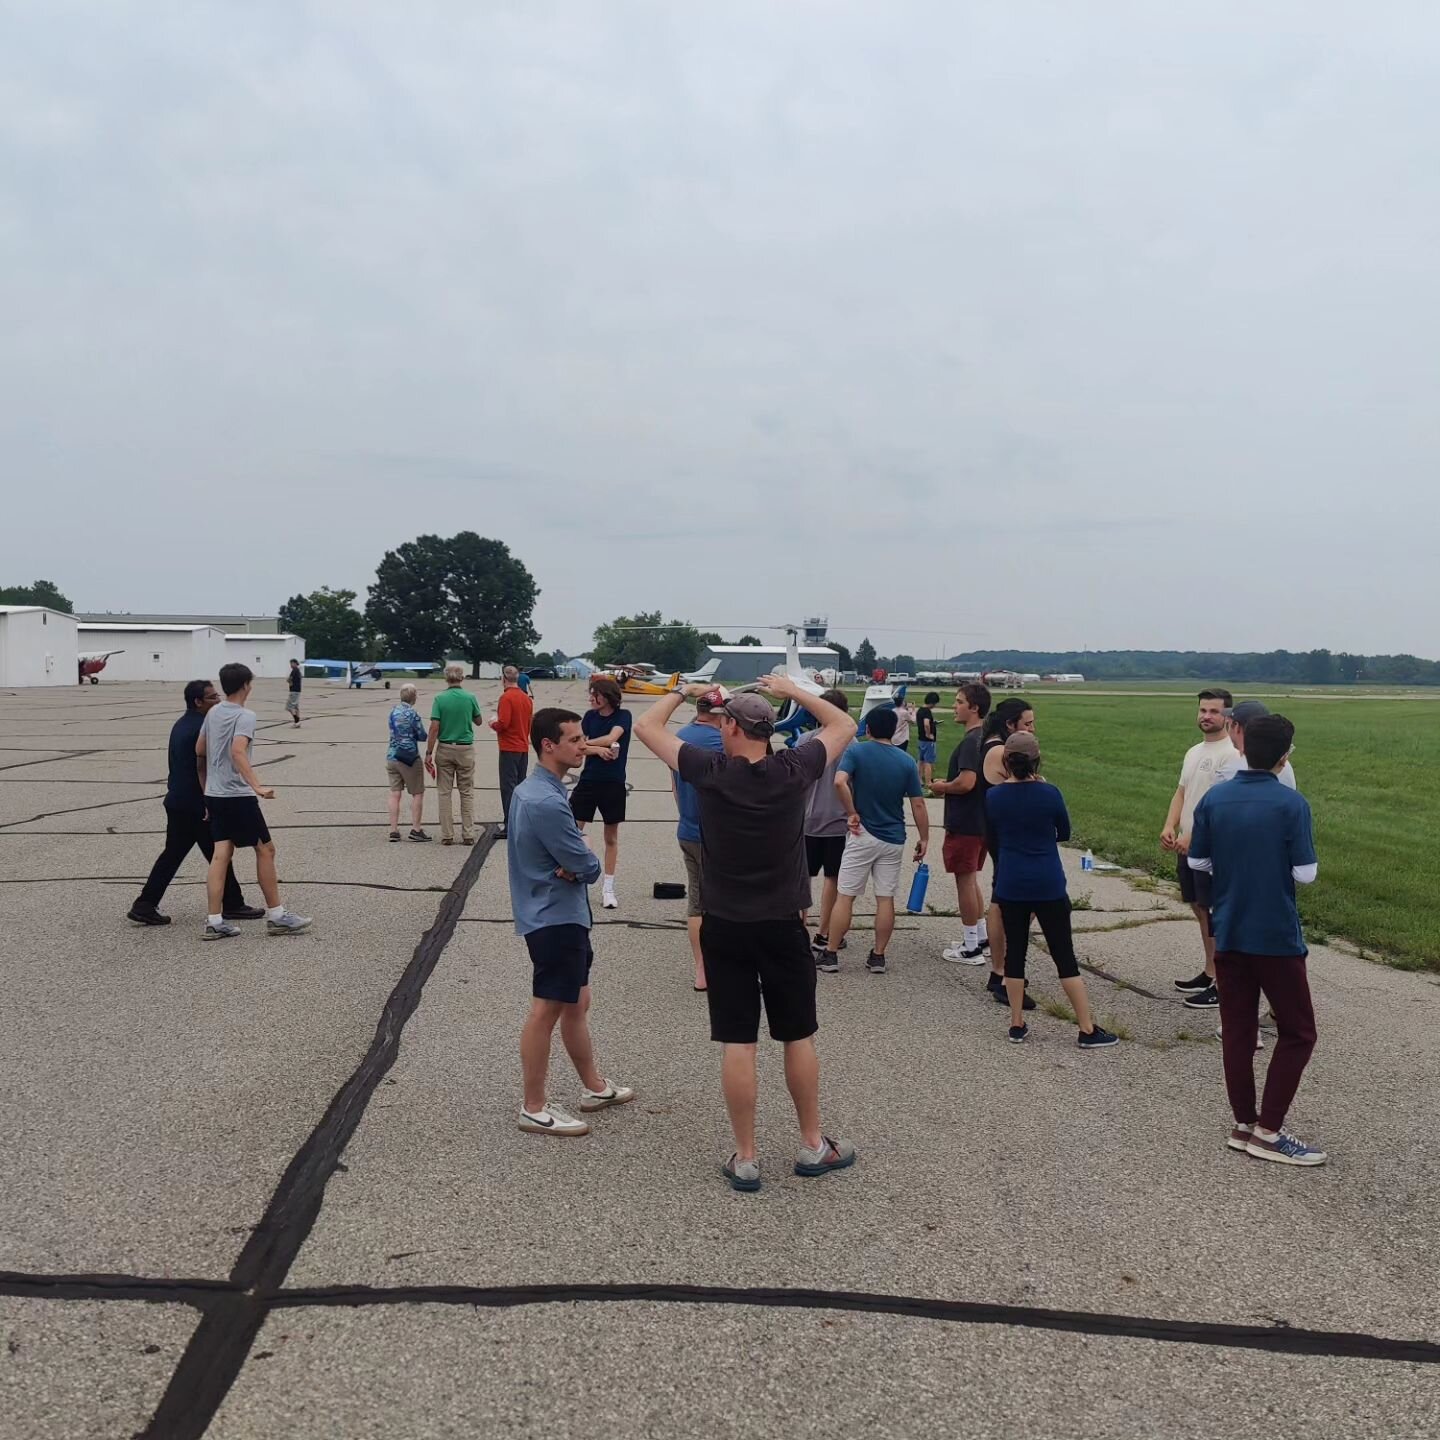 Thanks to everyone who came out and made our Sand Drop Competition a great night!  We had 9 airplanes and 35 total participants from within the club who dropped a total of 54 sand bags.  The winning drop was only 27ft off target which is quite a feat